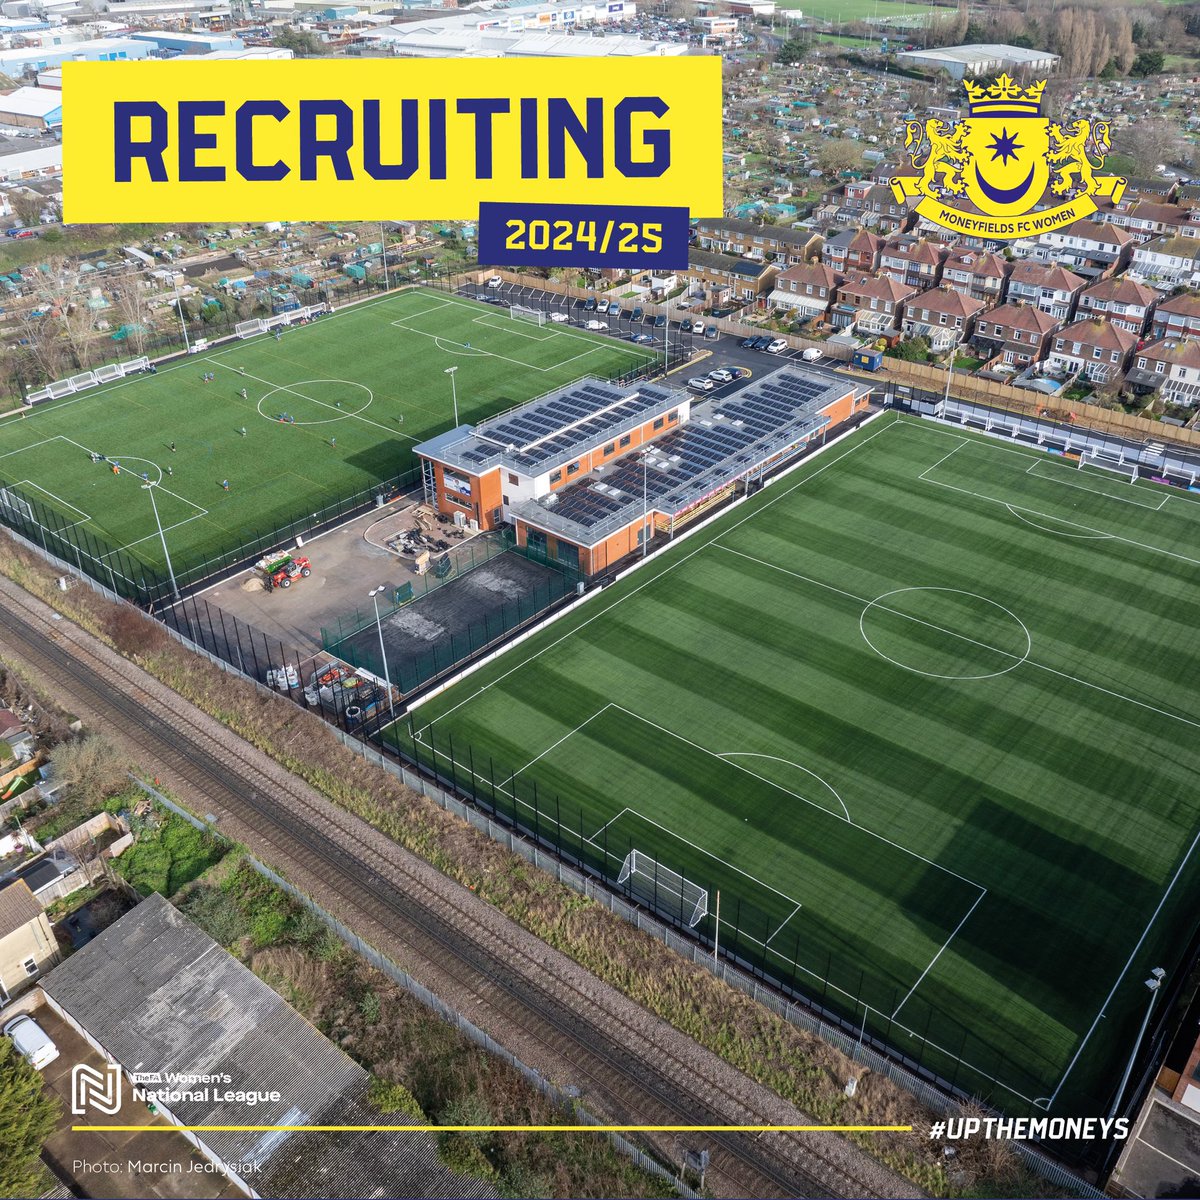 We are recruiting for various roles, including coaches and support staff, for the 2024/25 season. Players that are interested in our open training sessions this June can register their interest now 👉 bit.ly/3UCIWT8 #UpTheMoneys | @WoSoRecruitment